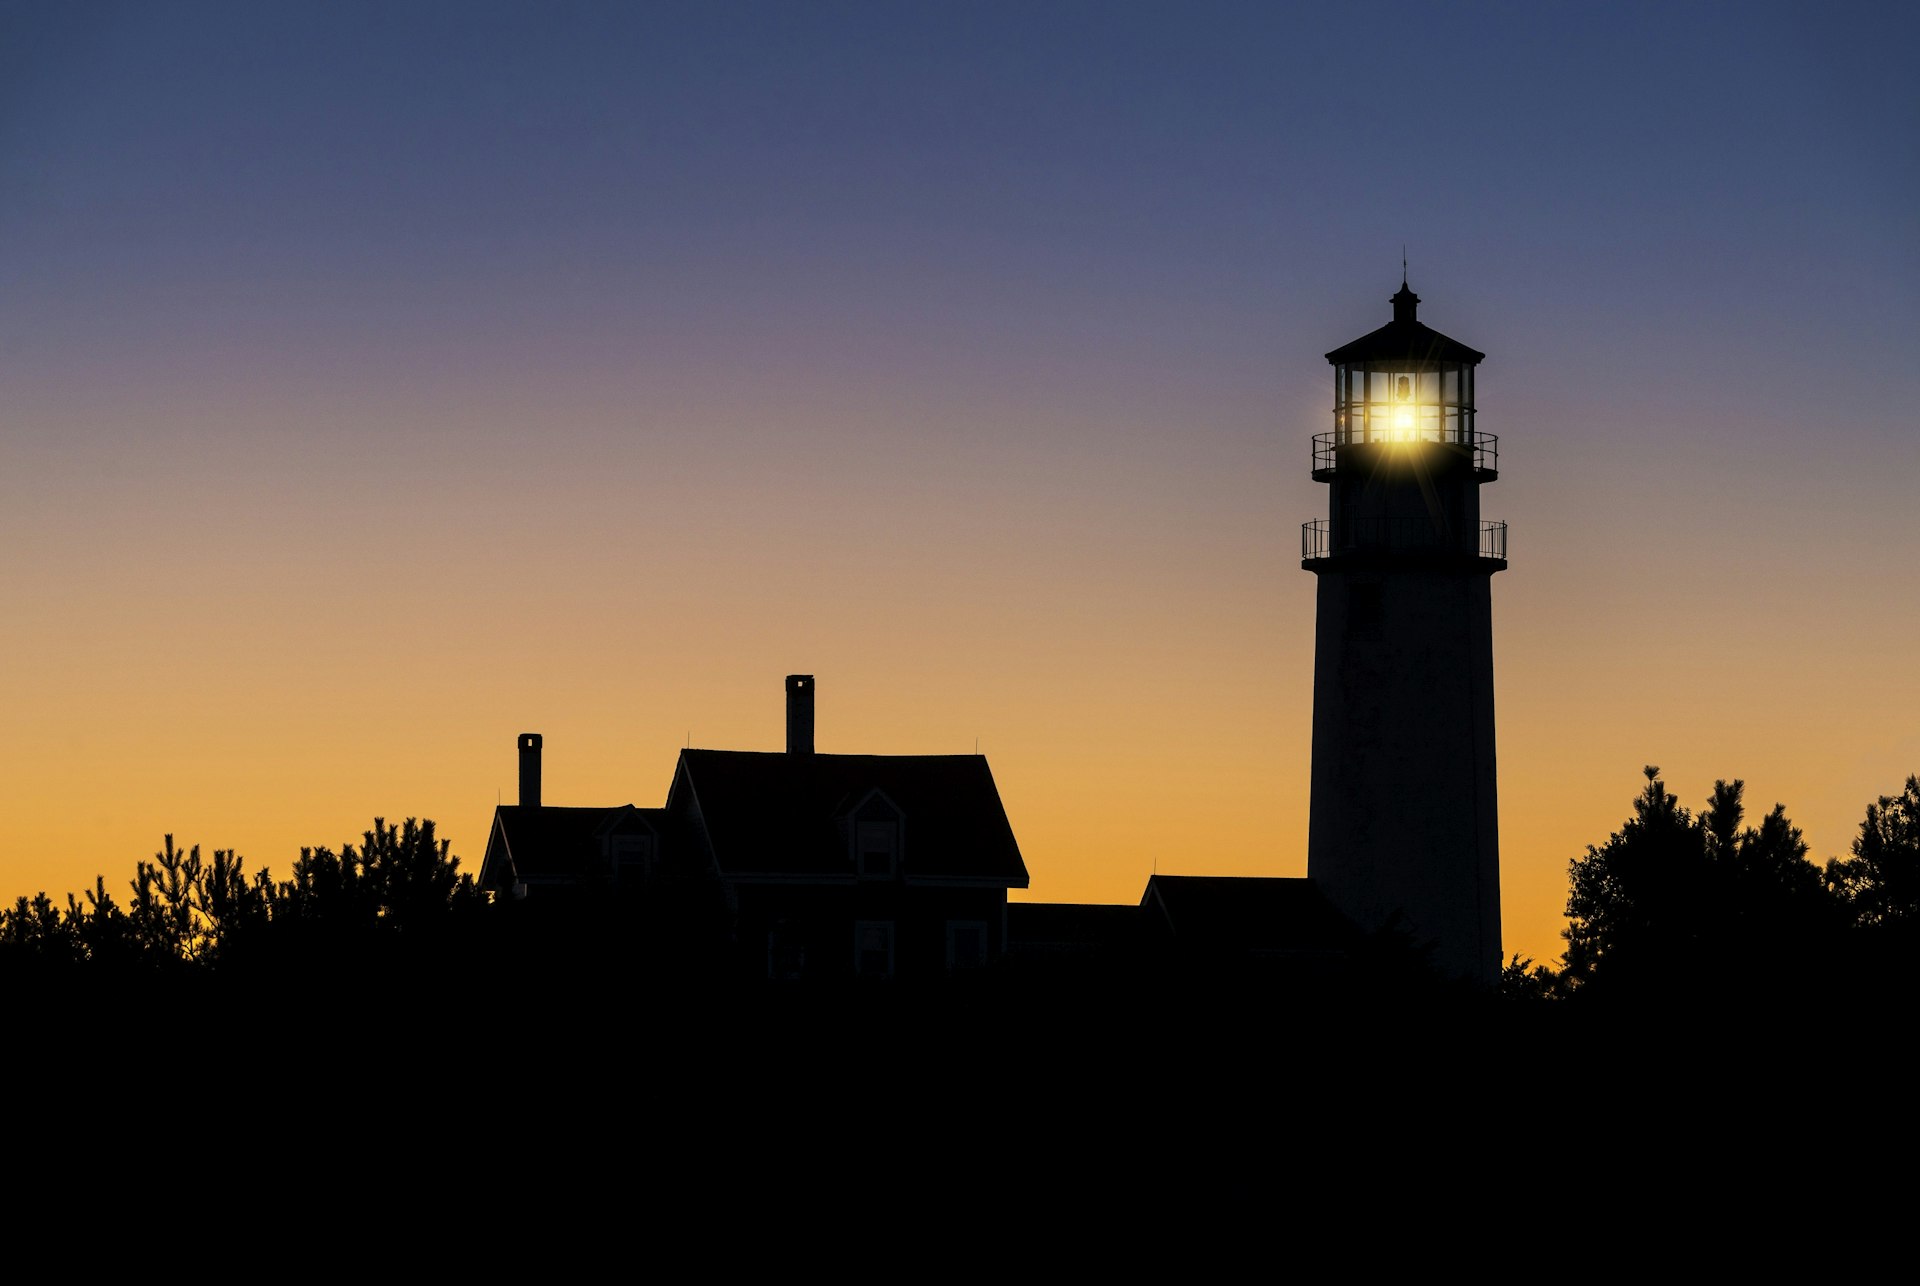 Silhouette of the Highland Lighthouse at dawn